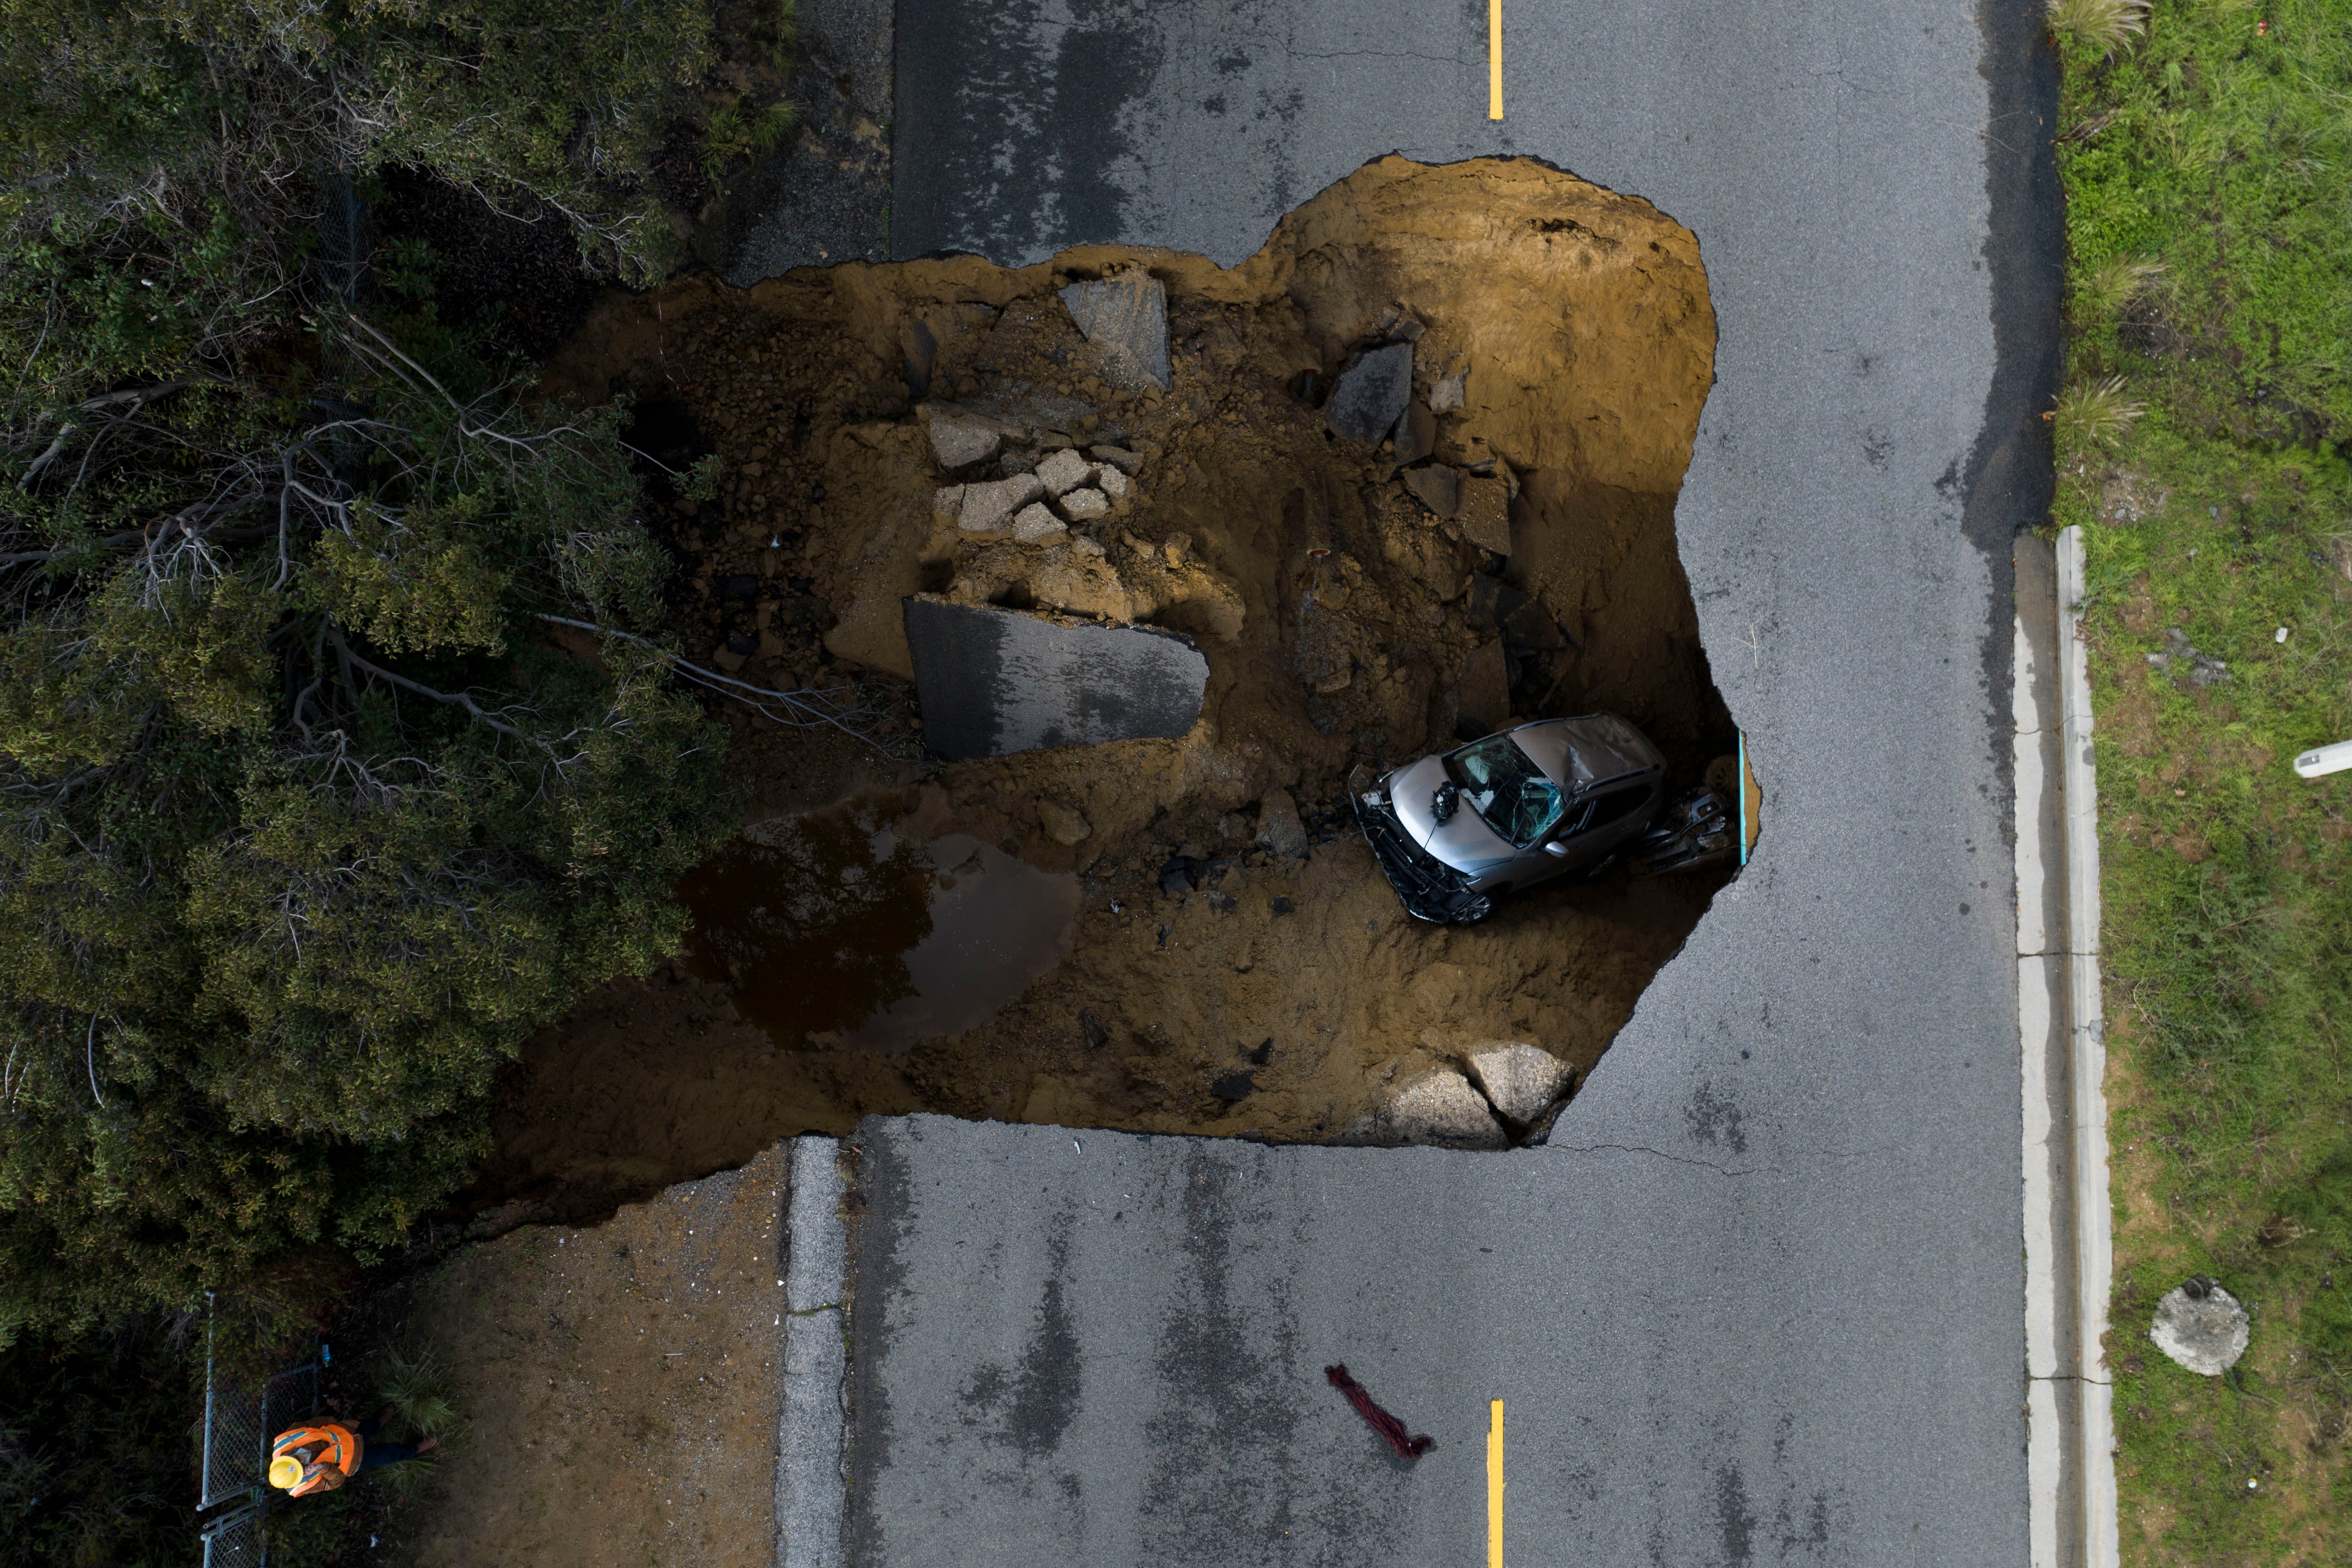 A vehicle is stuck in a sinkhole in the Chatsworth section of Los Angeles, Tuesday, Jan. 10, 2023